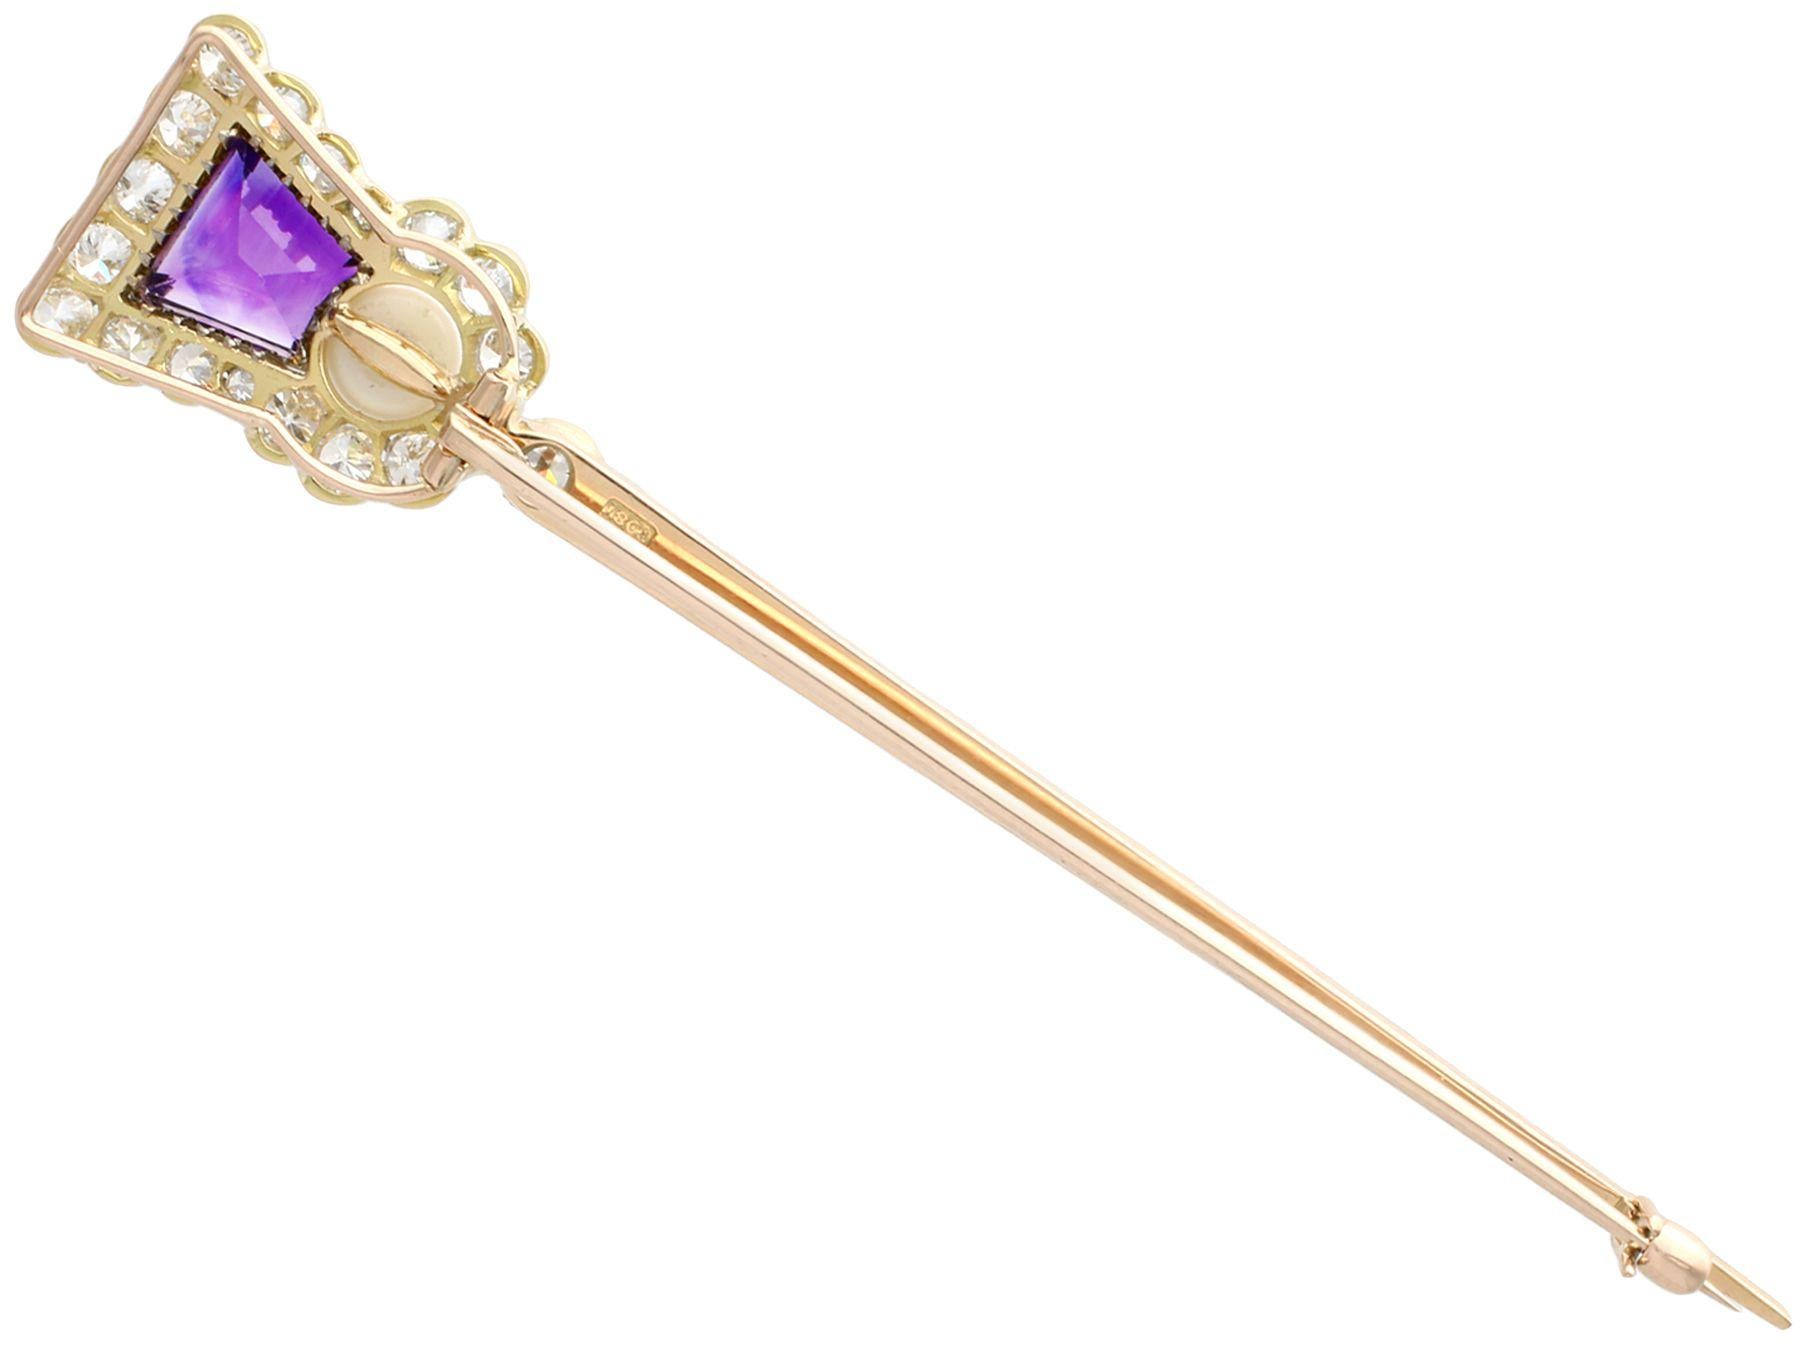 Round Cut 1.71 Carat Amethyst 1.90 Carat Diamond and Pearl Yellow Gold Thistle Pin Brooch